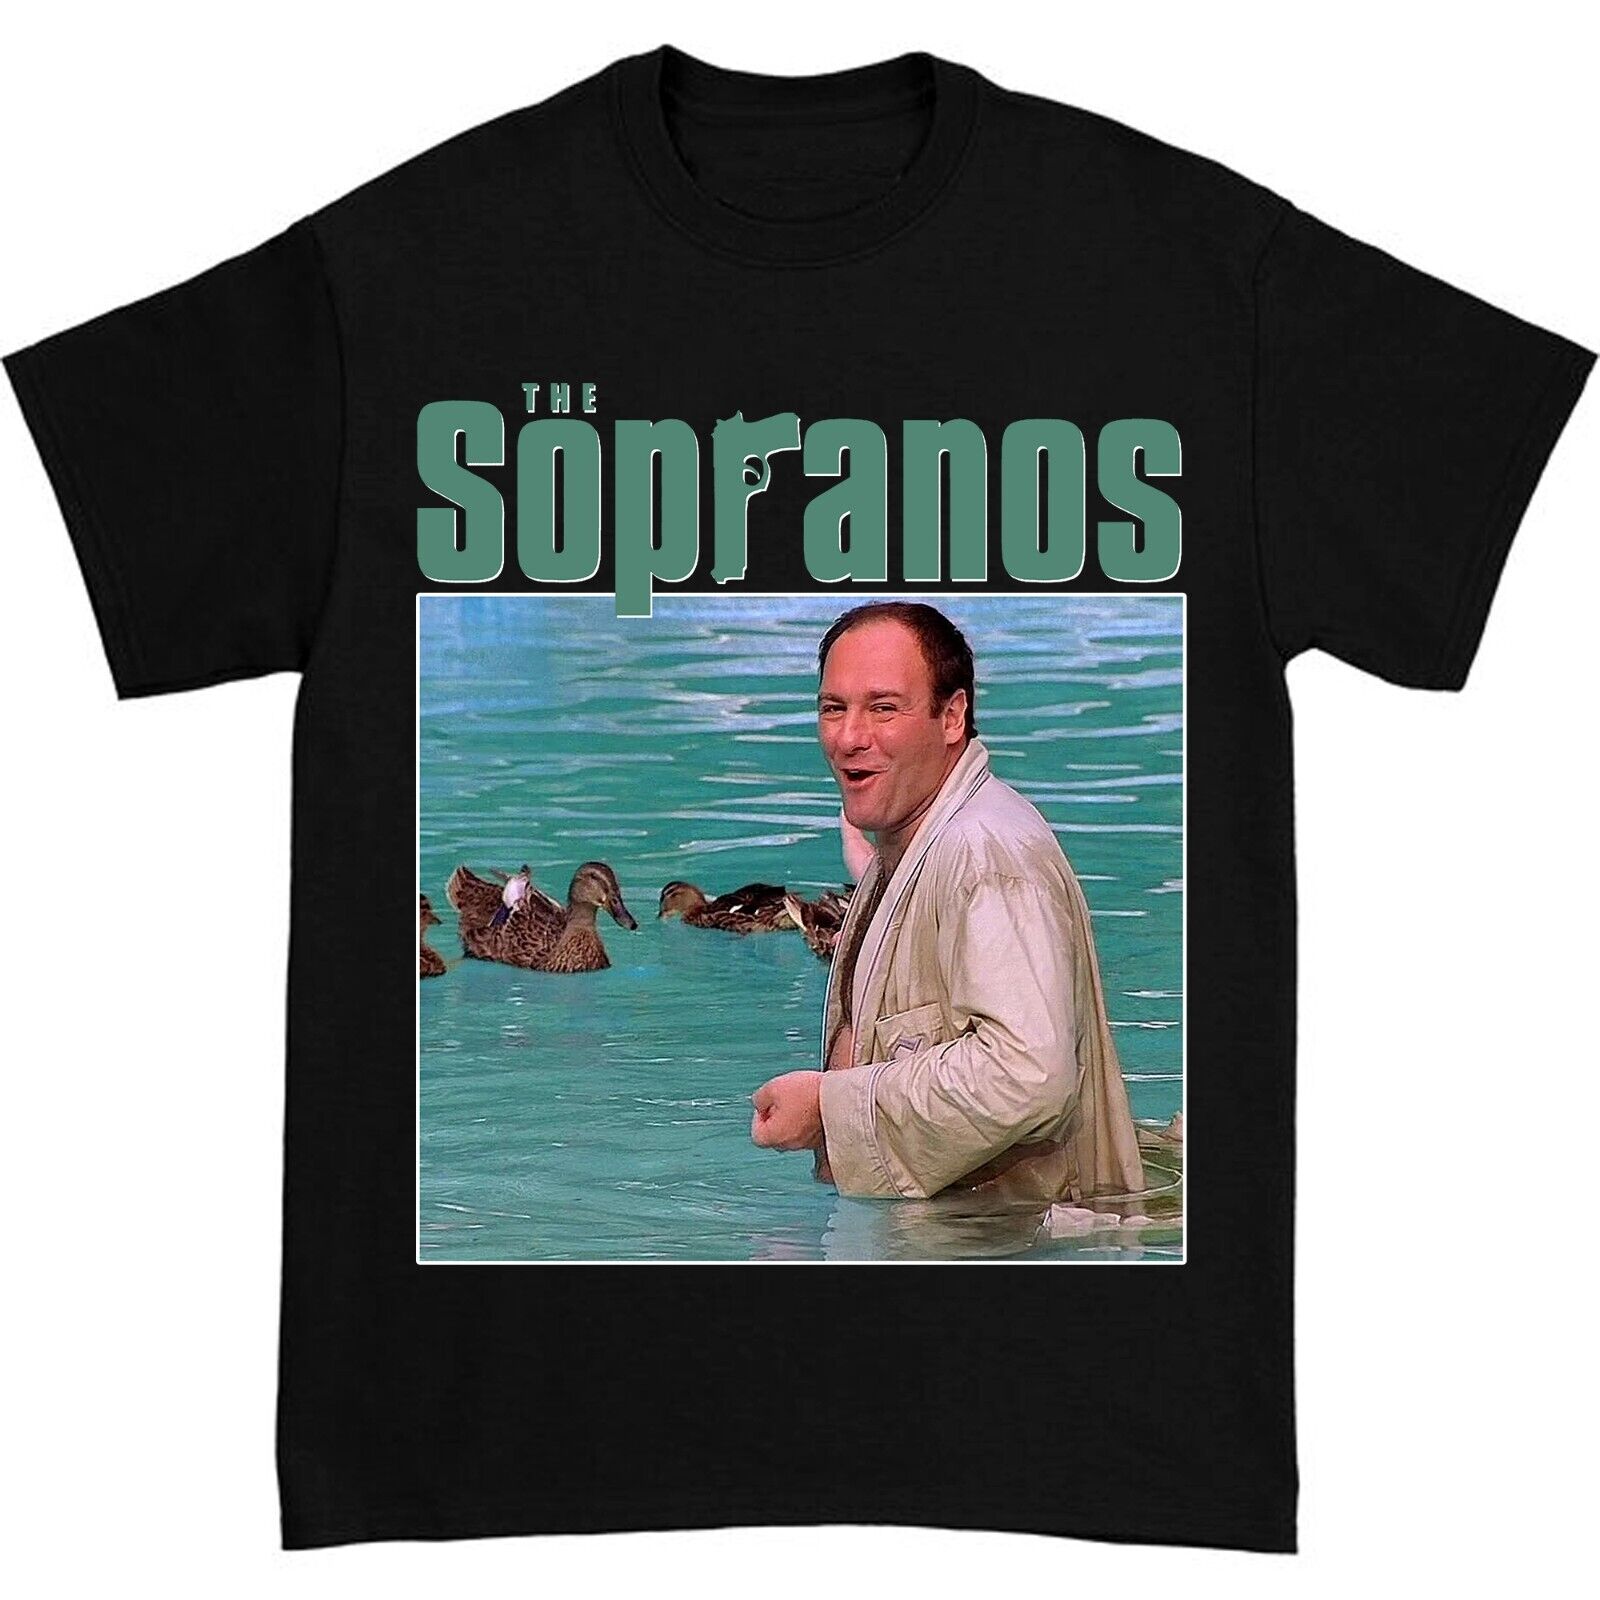 New The Sopranos Cotton Unisex T-Shirt Available in All Sizes SELLING FAST